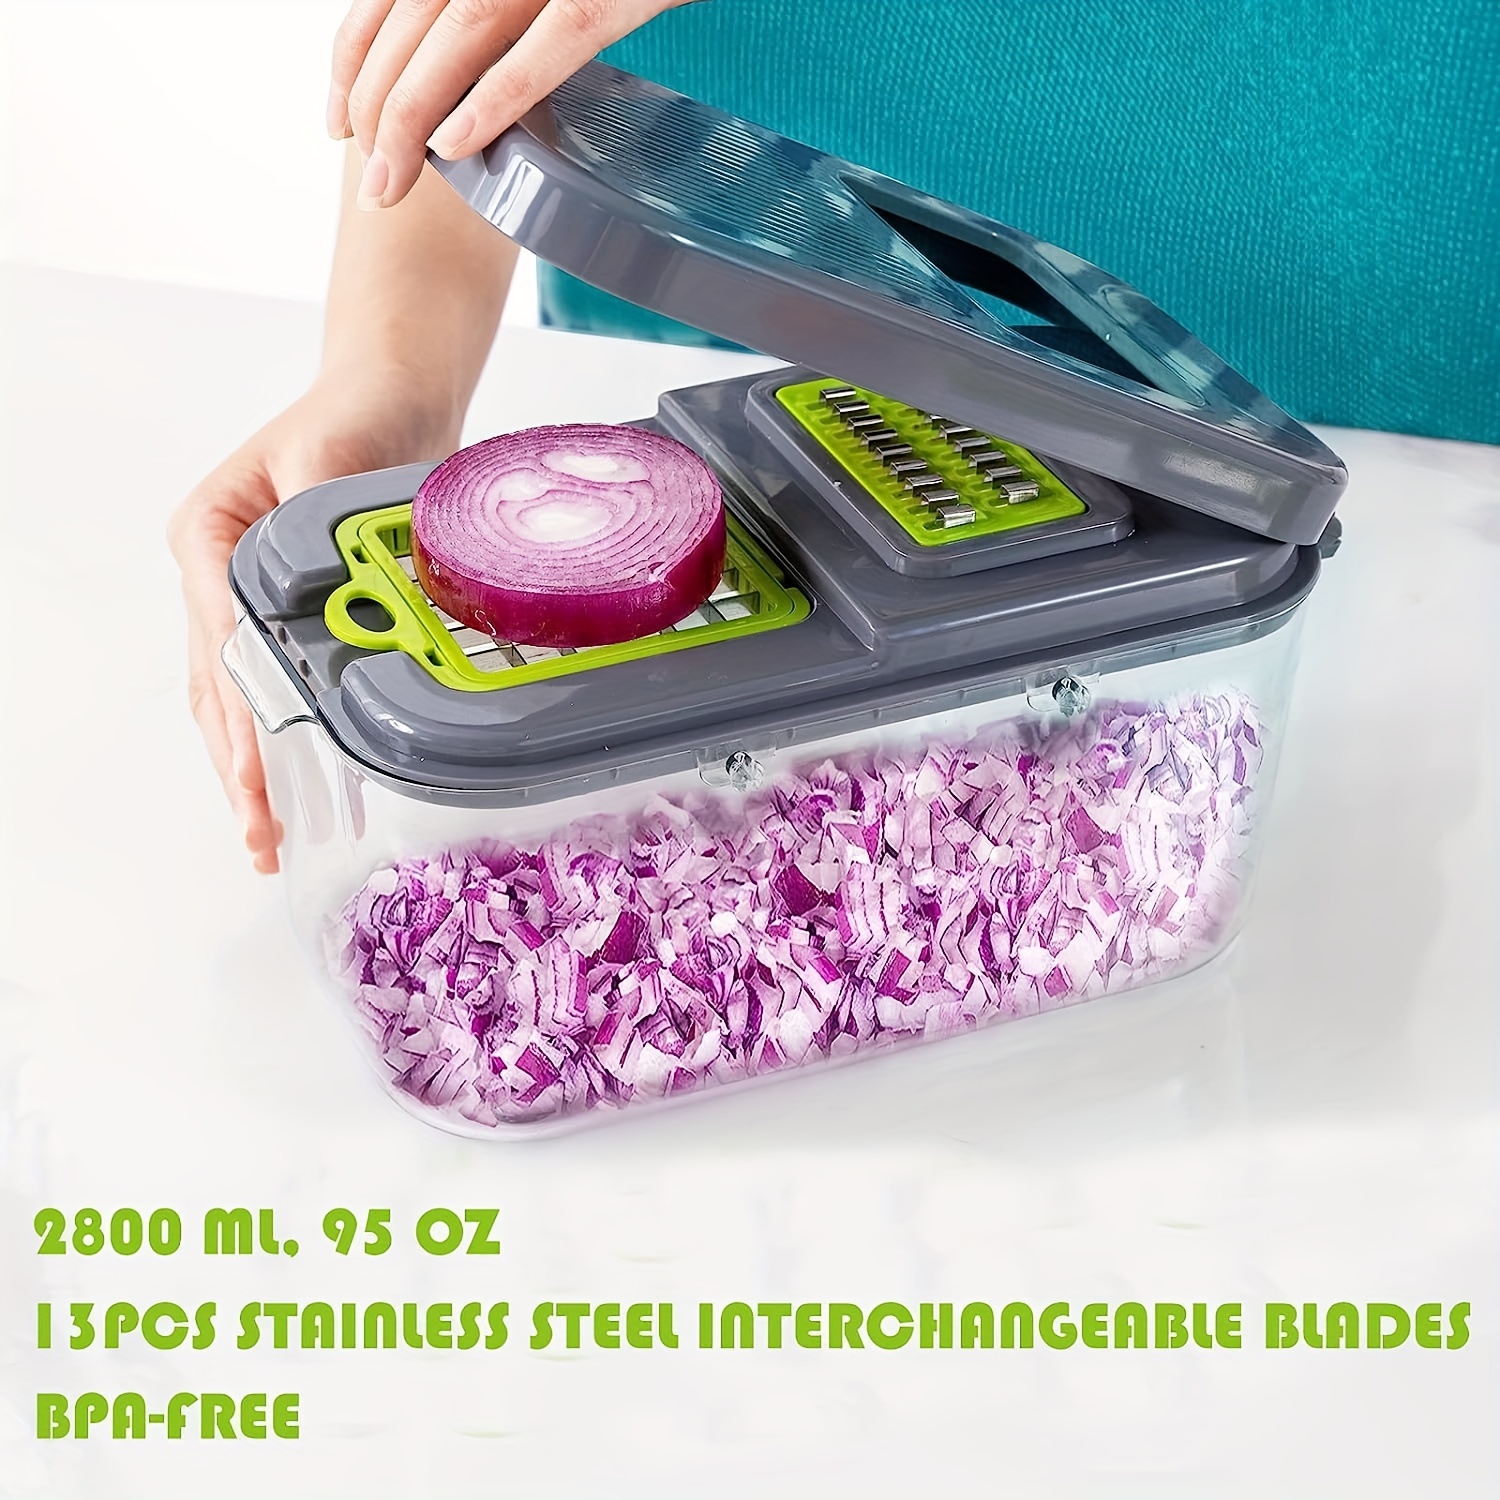 13 In 1 Multifunctional Food Dicer Onion Cutter, Slicer with Container, 10  Interchangeable Stainless Steel Blades 